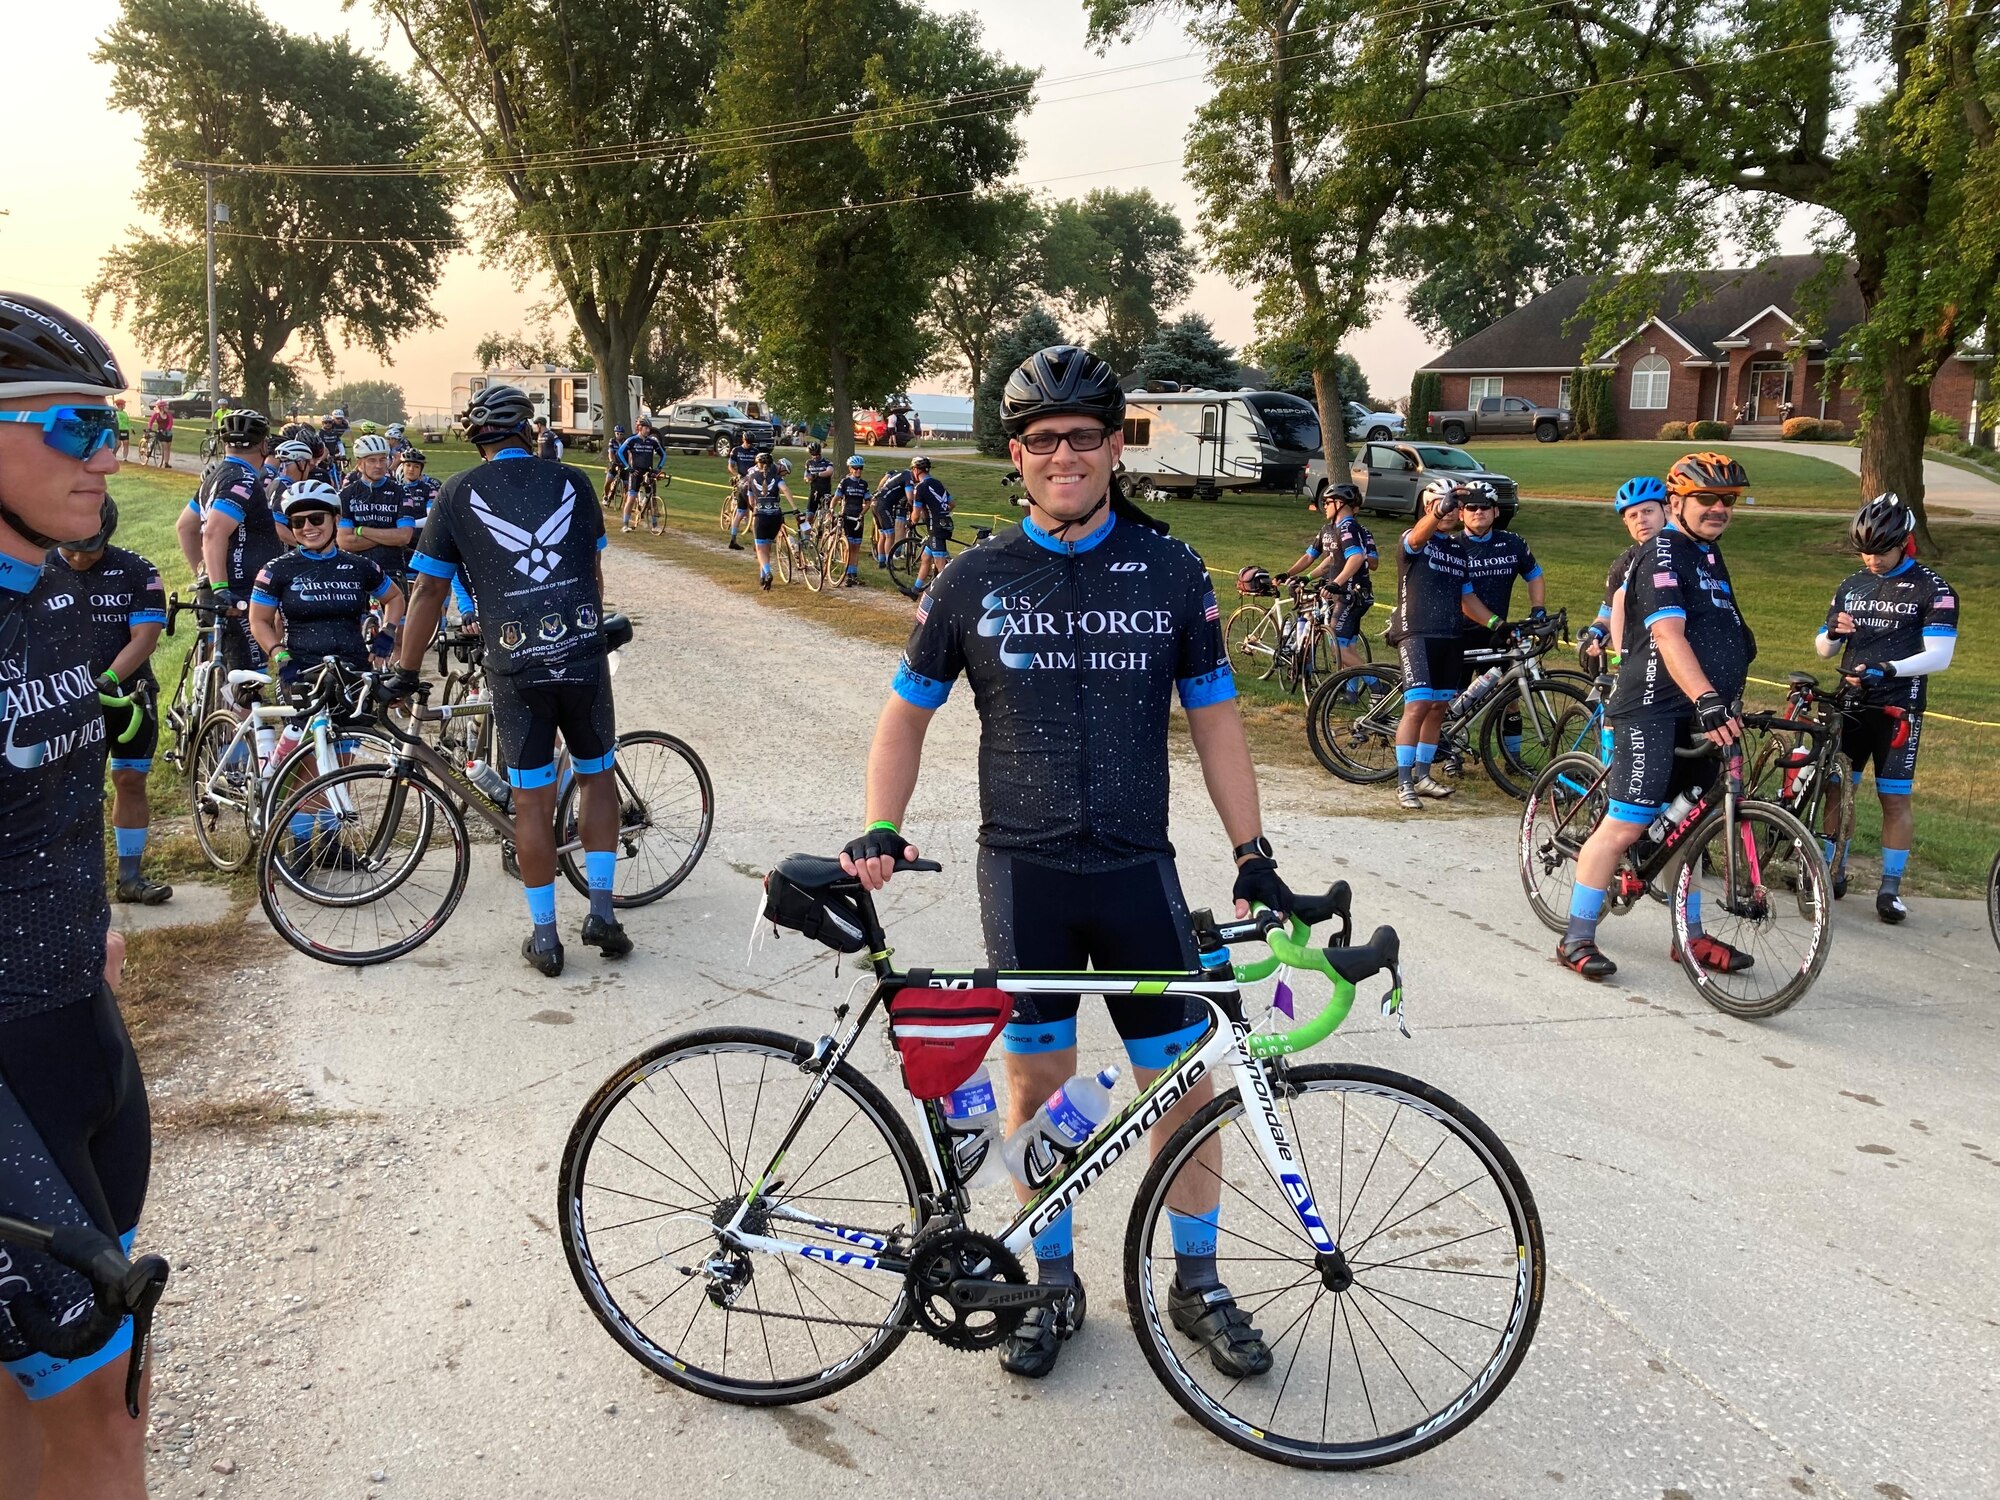 2nd Lt. Steven Carroll, a reservist in the 419th Fighter Wing, recently completed more than 500 miles alongside the U.S. Air Force Cycling Team as part of the Register’s Annual Great Bicycle Ride Across Iowa event July 25-31.